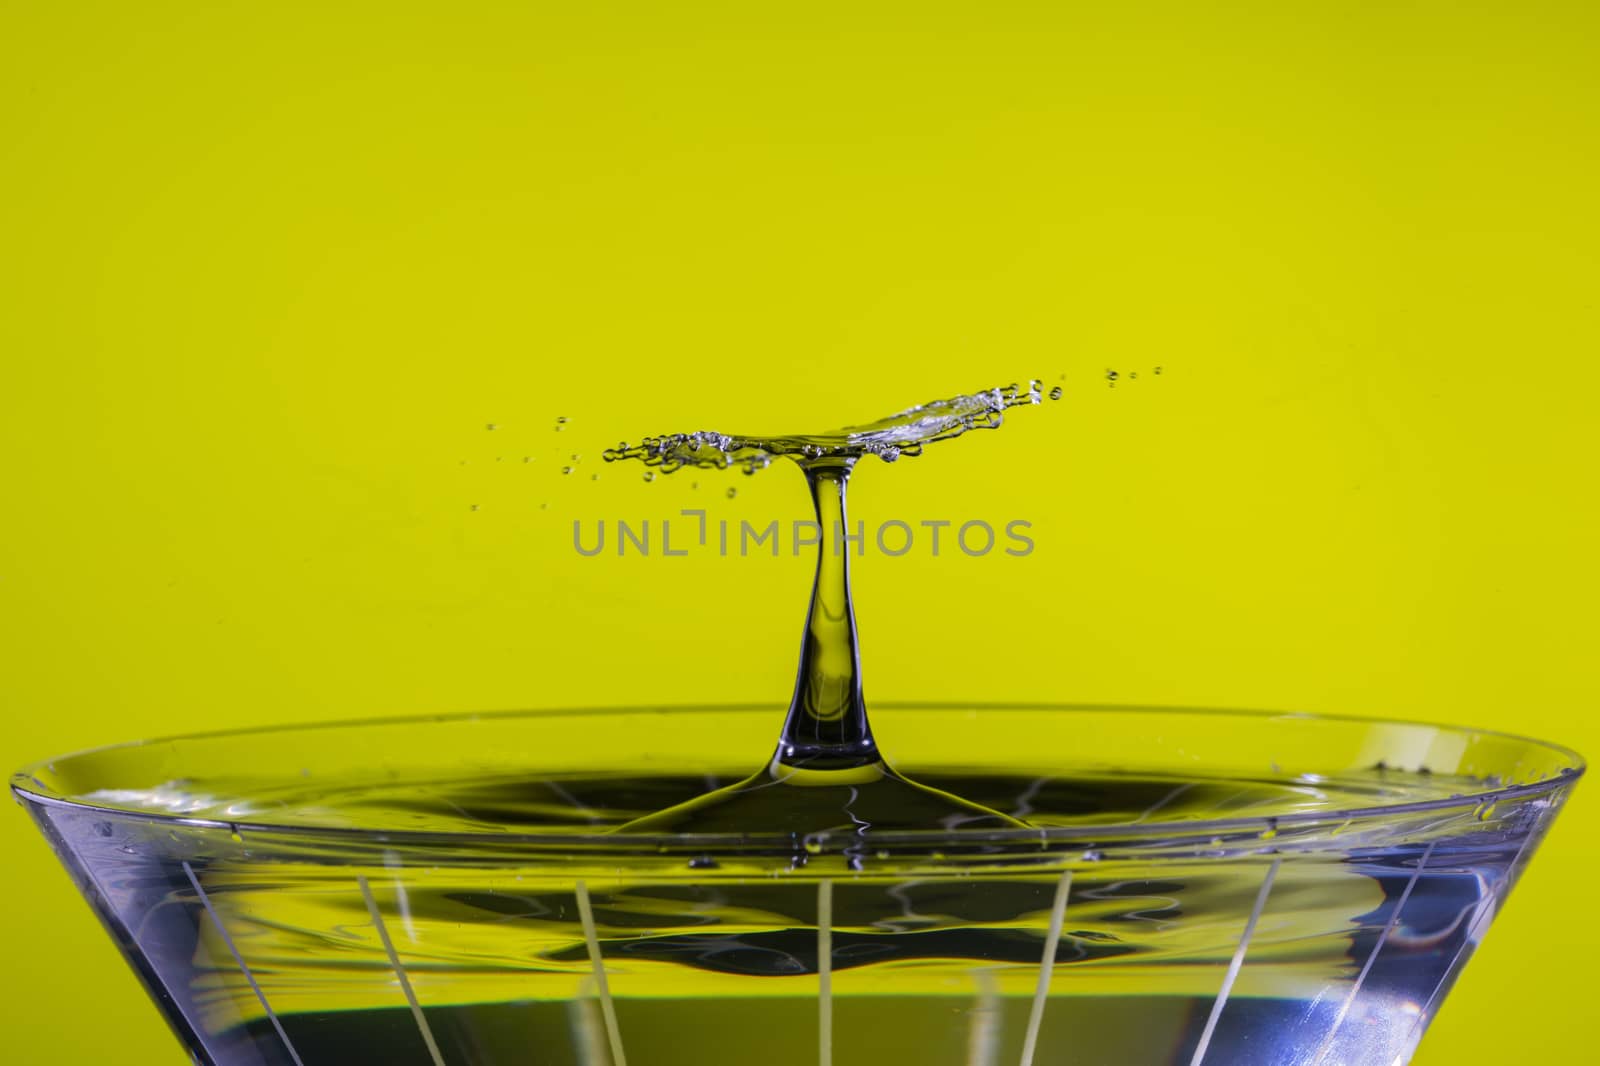 A falling drop collides with a rising splash column over a martini glass, creating a flat disk of radiating spray.